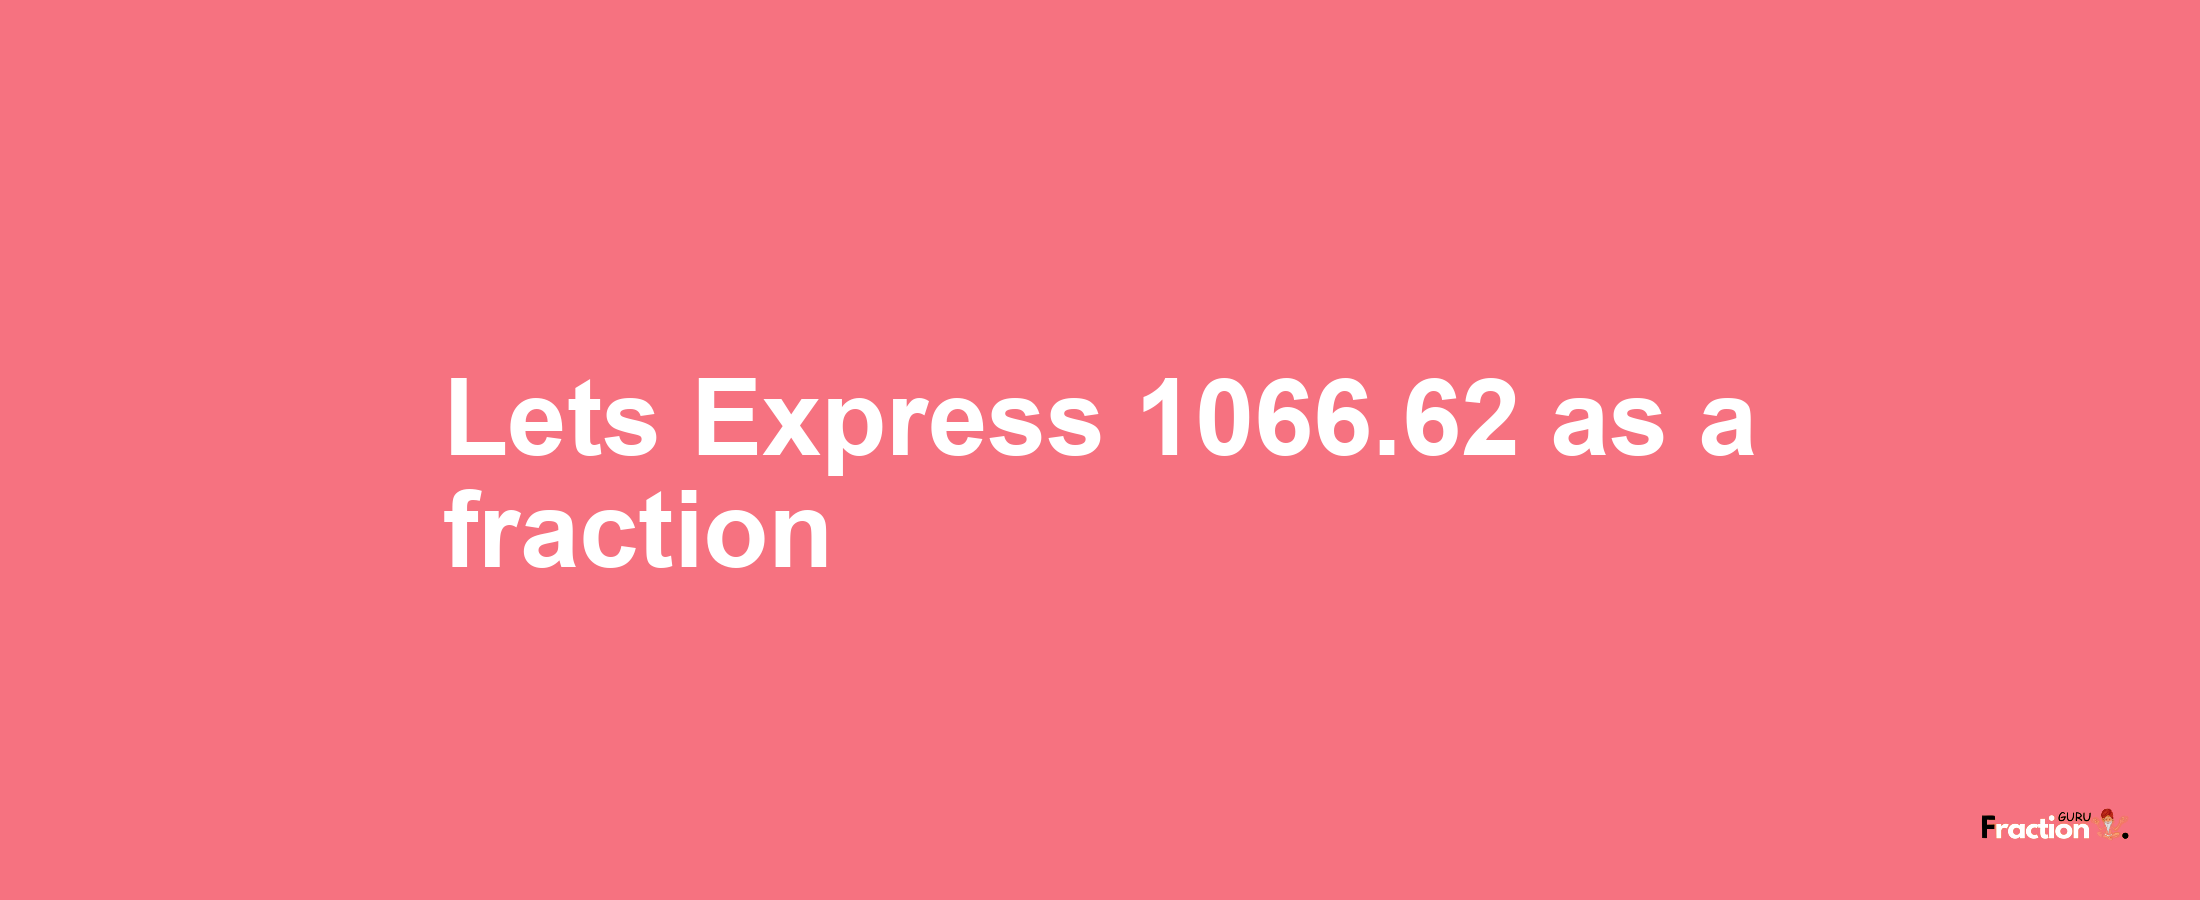 Lets Express 1066.62 as afraction